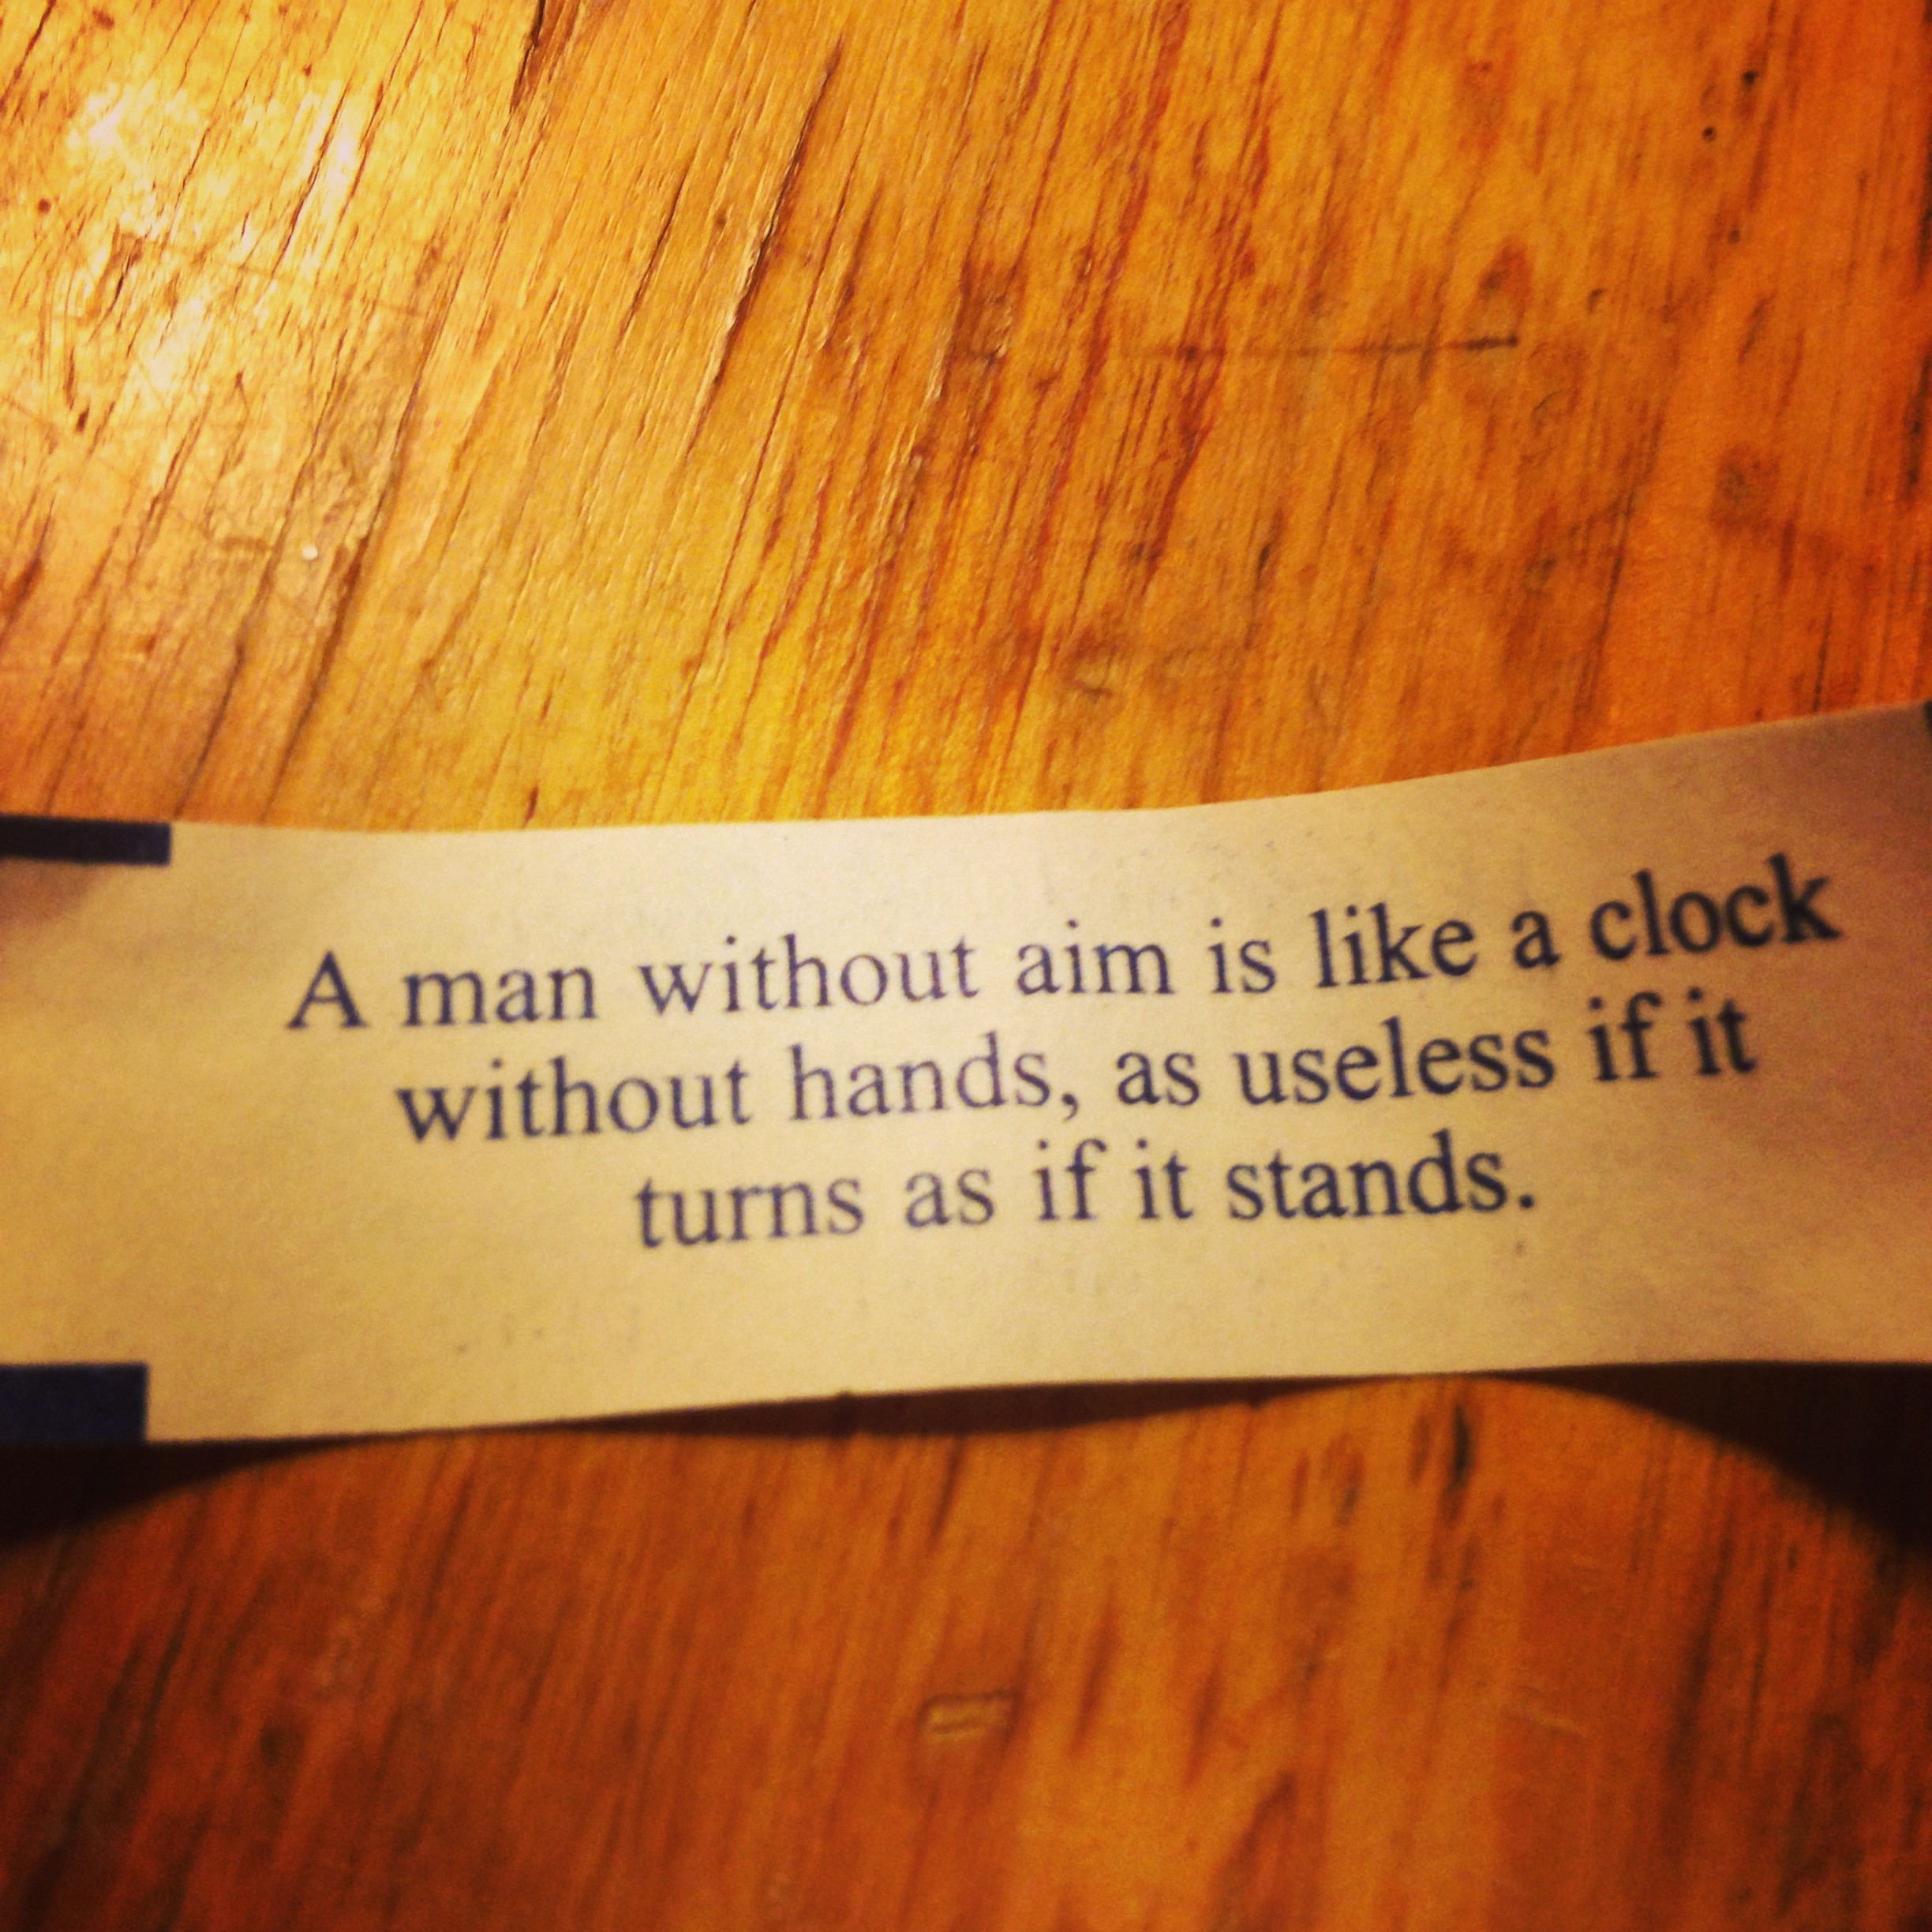  Sometimes you must listen to the fortune cookie. 